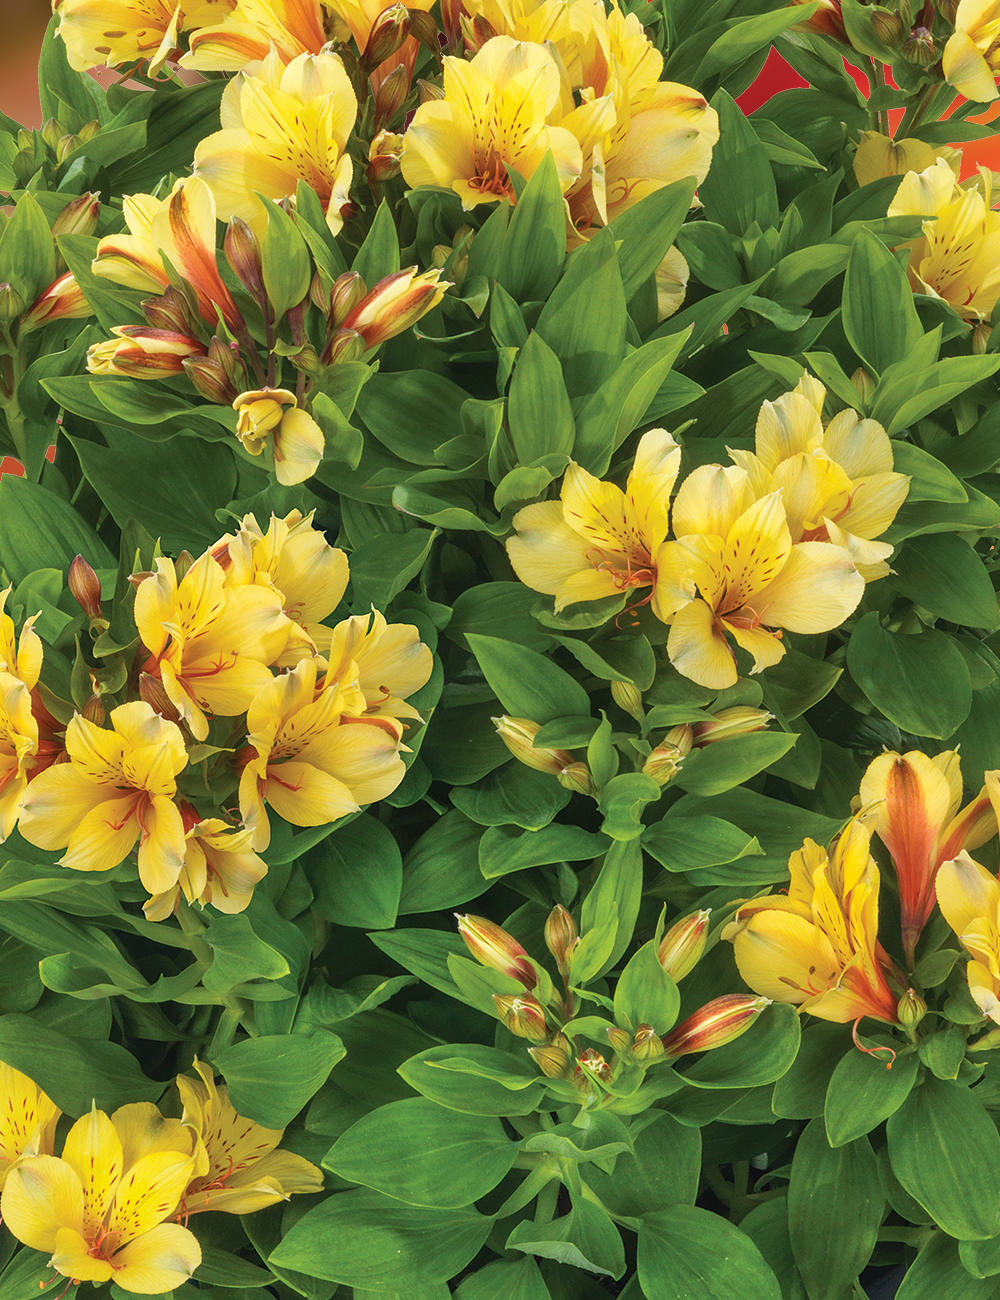 Peruvian Lily 'Spring Valley'